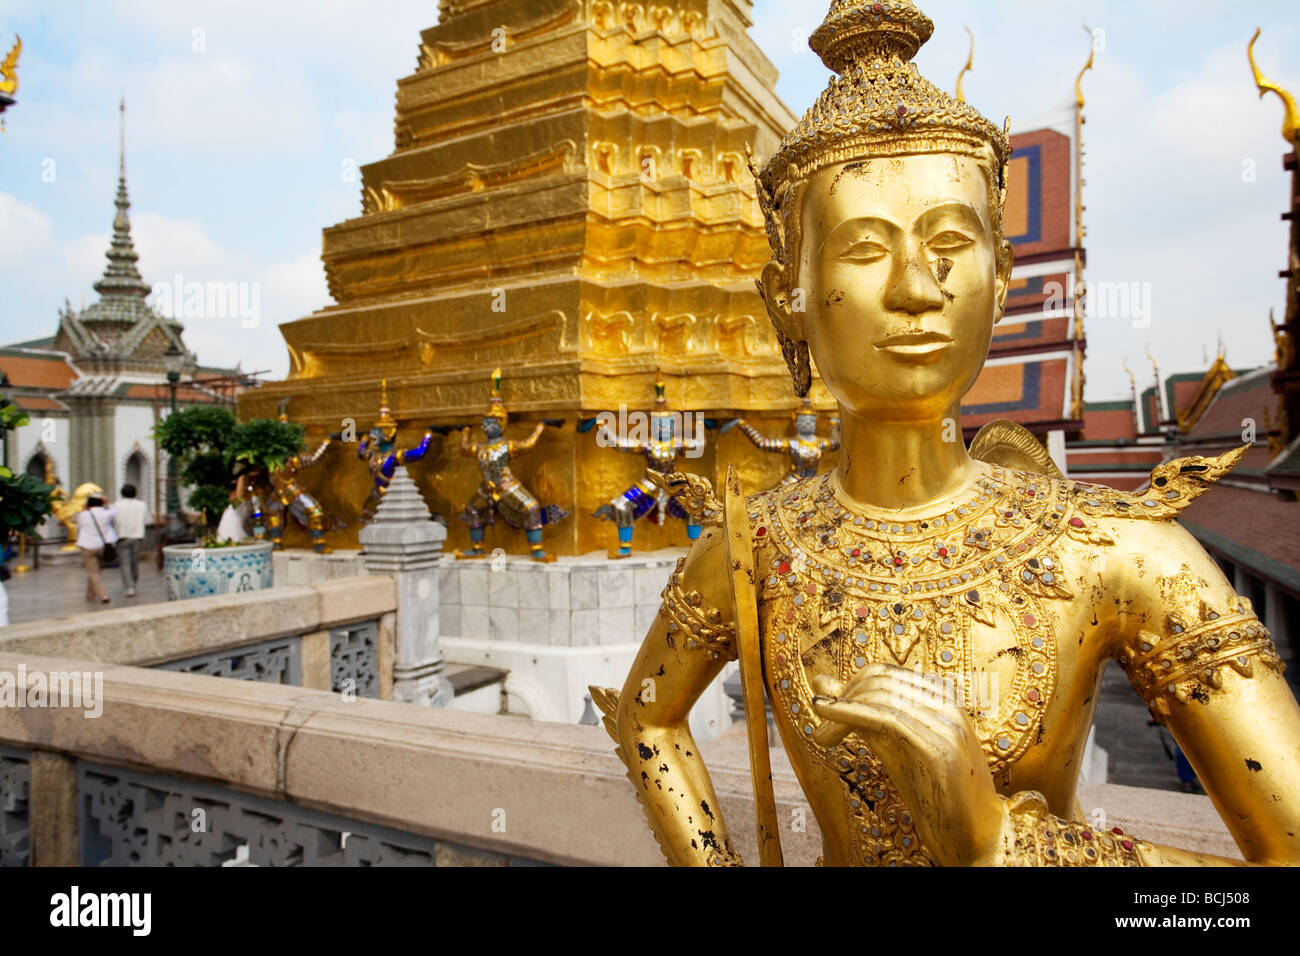 Golden statue within the gates of the Grand Palace in Bangkok Thailand Stock Photo